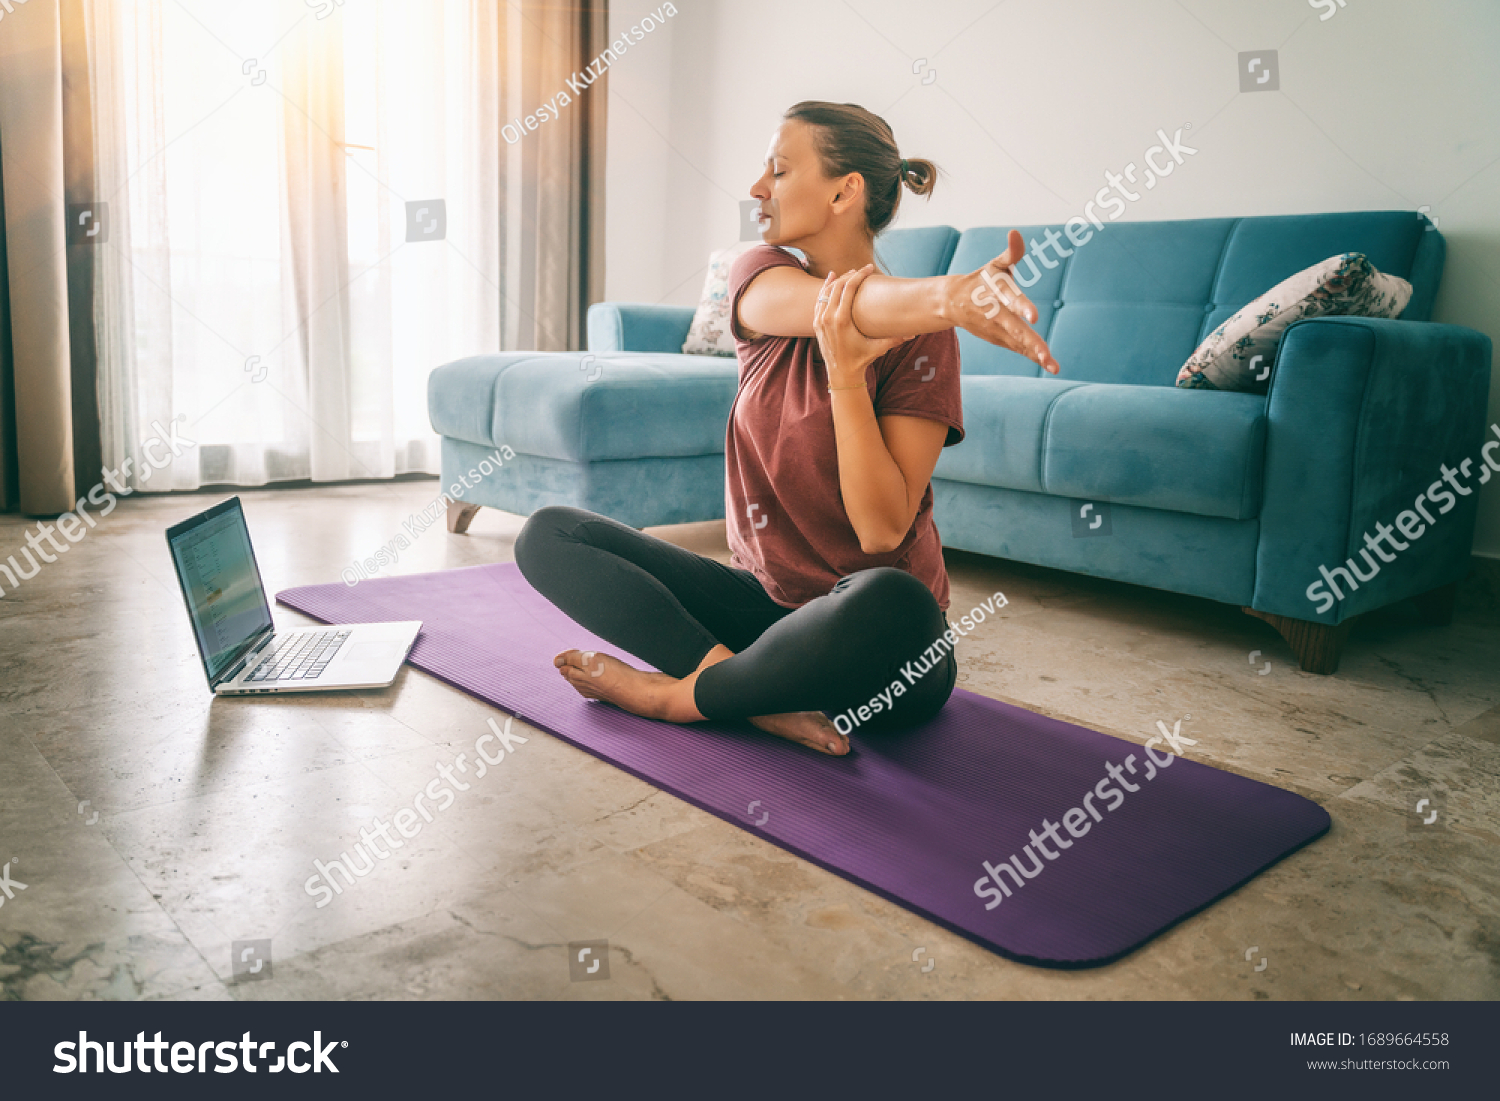 Attractive young woman doing yoga stretching yoga online at home. Self-isolation is beneficial, entertainment and education on the Internet. Healthy lifestyle concept. #1689664558